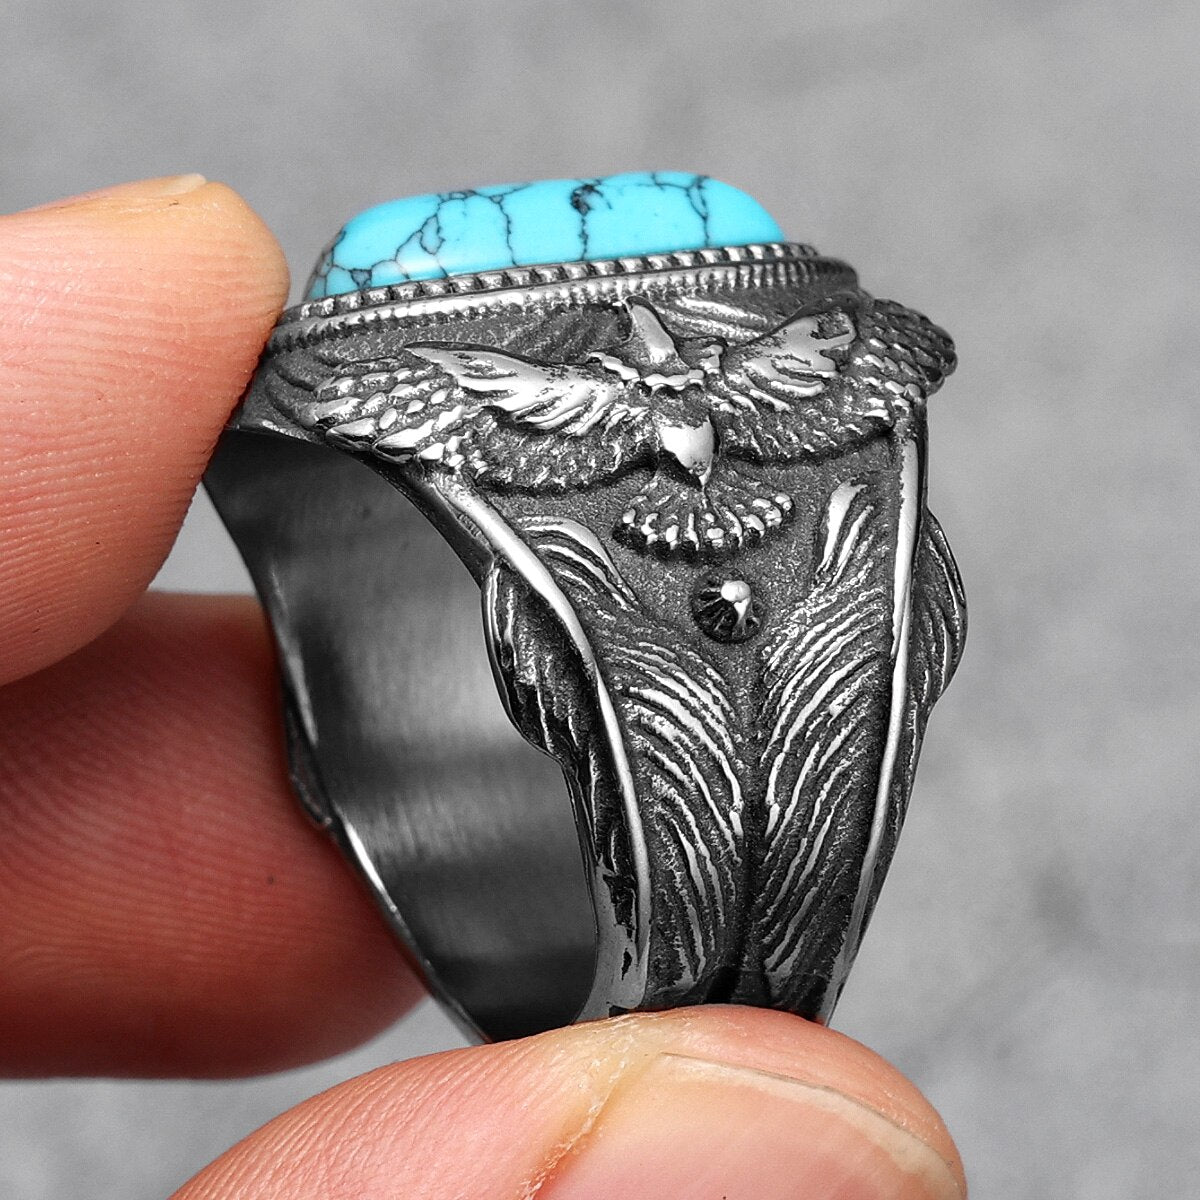 A Native Stone Totem Ring with a turquoise stone by Rebel Saint Co.